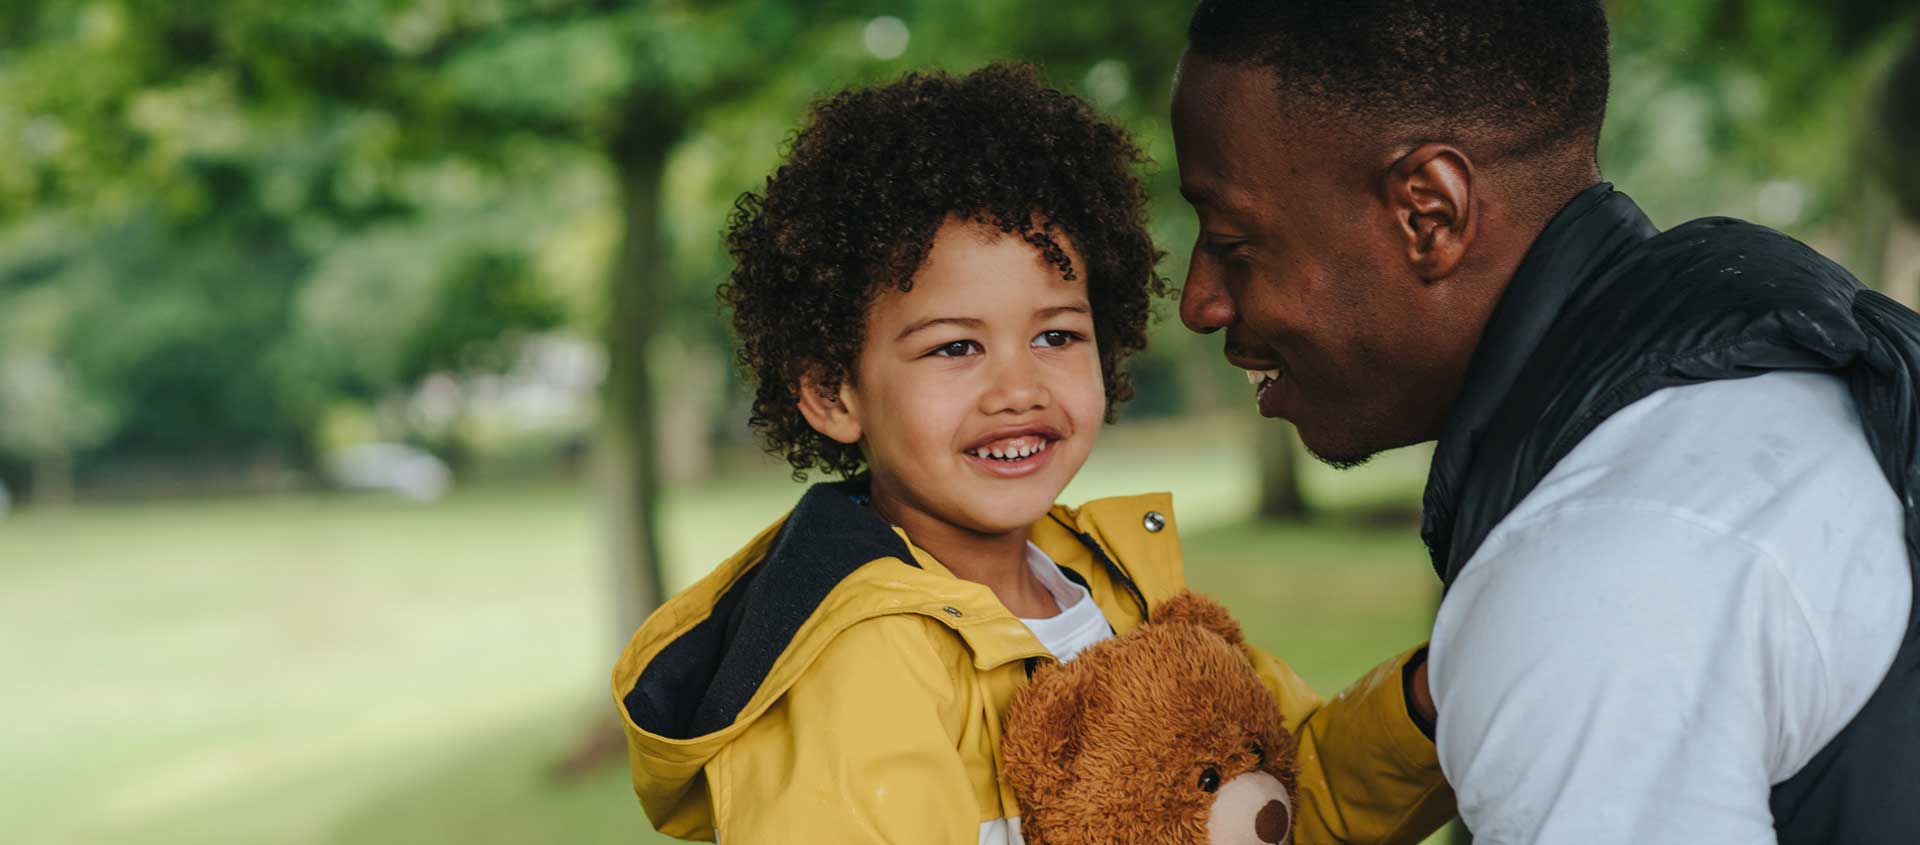 A Black American father and his preschool-aged child embrace in an outdoor setting..